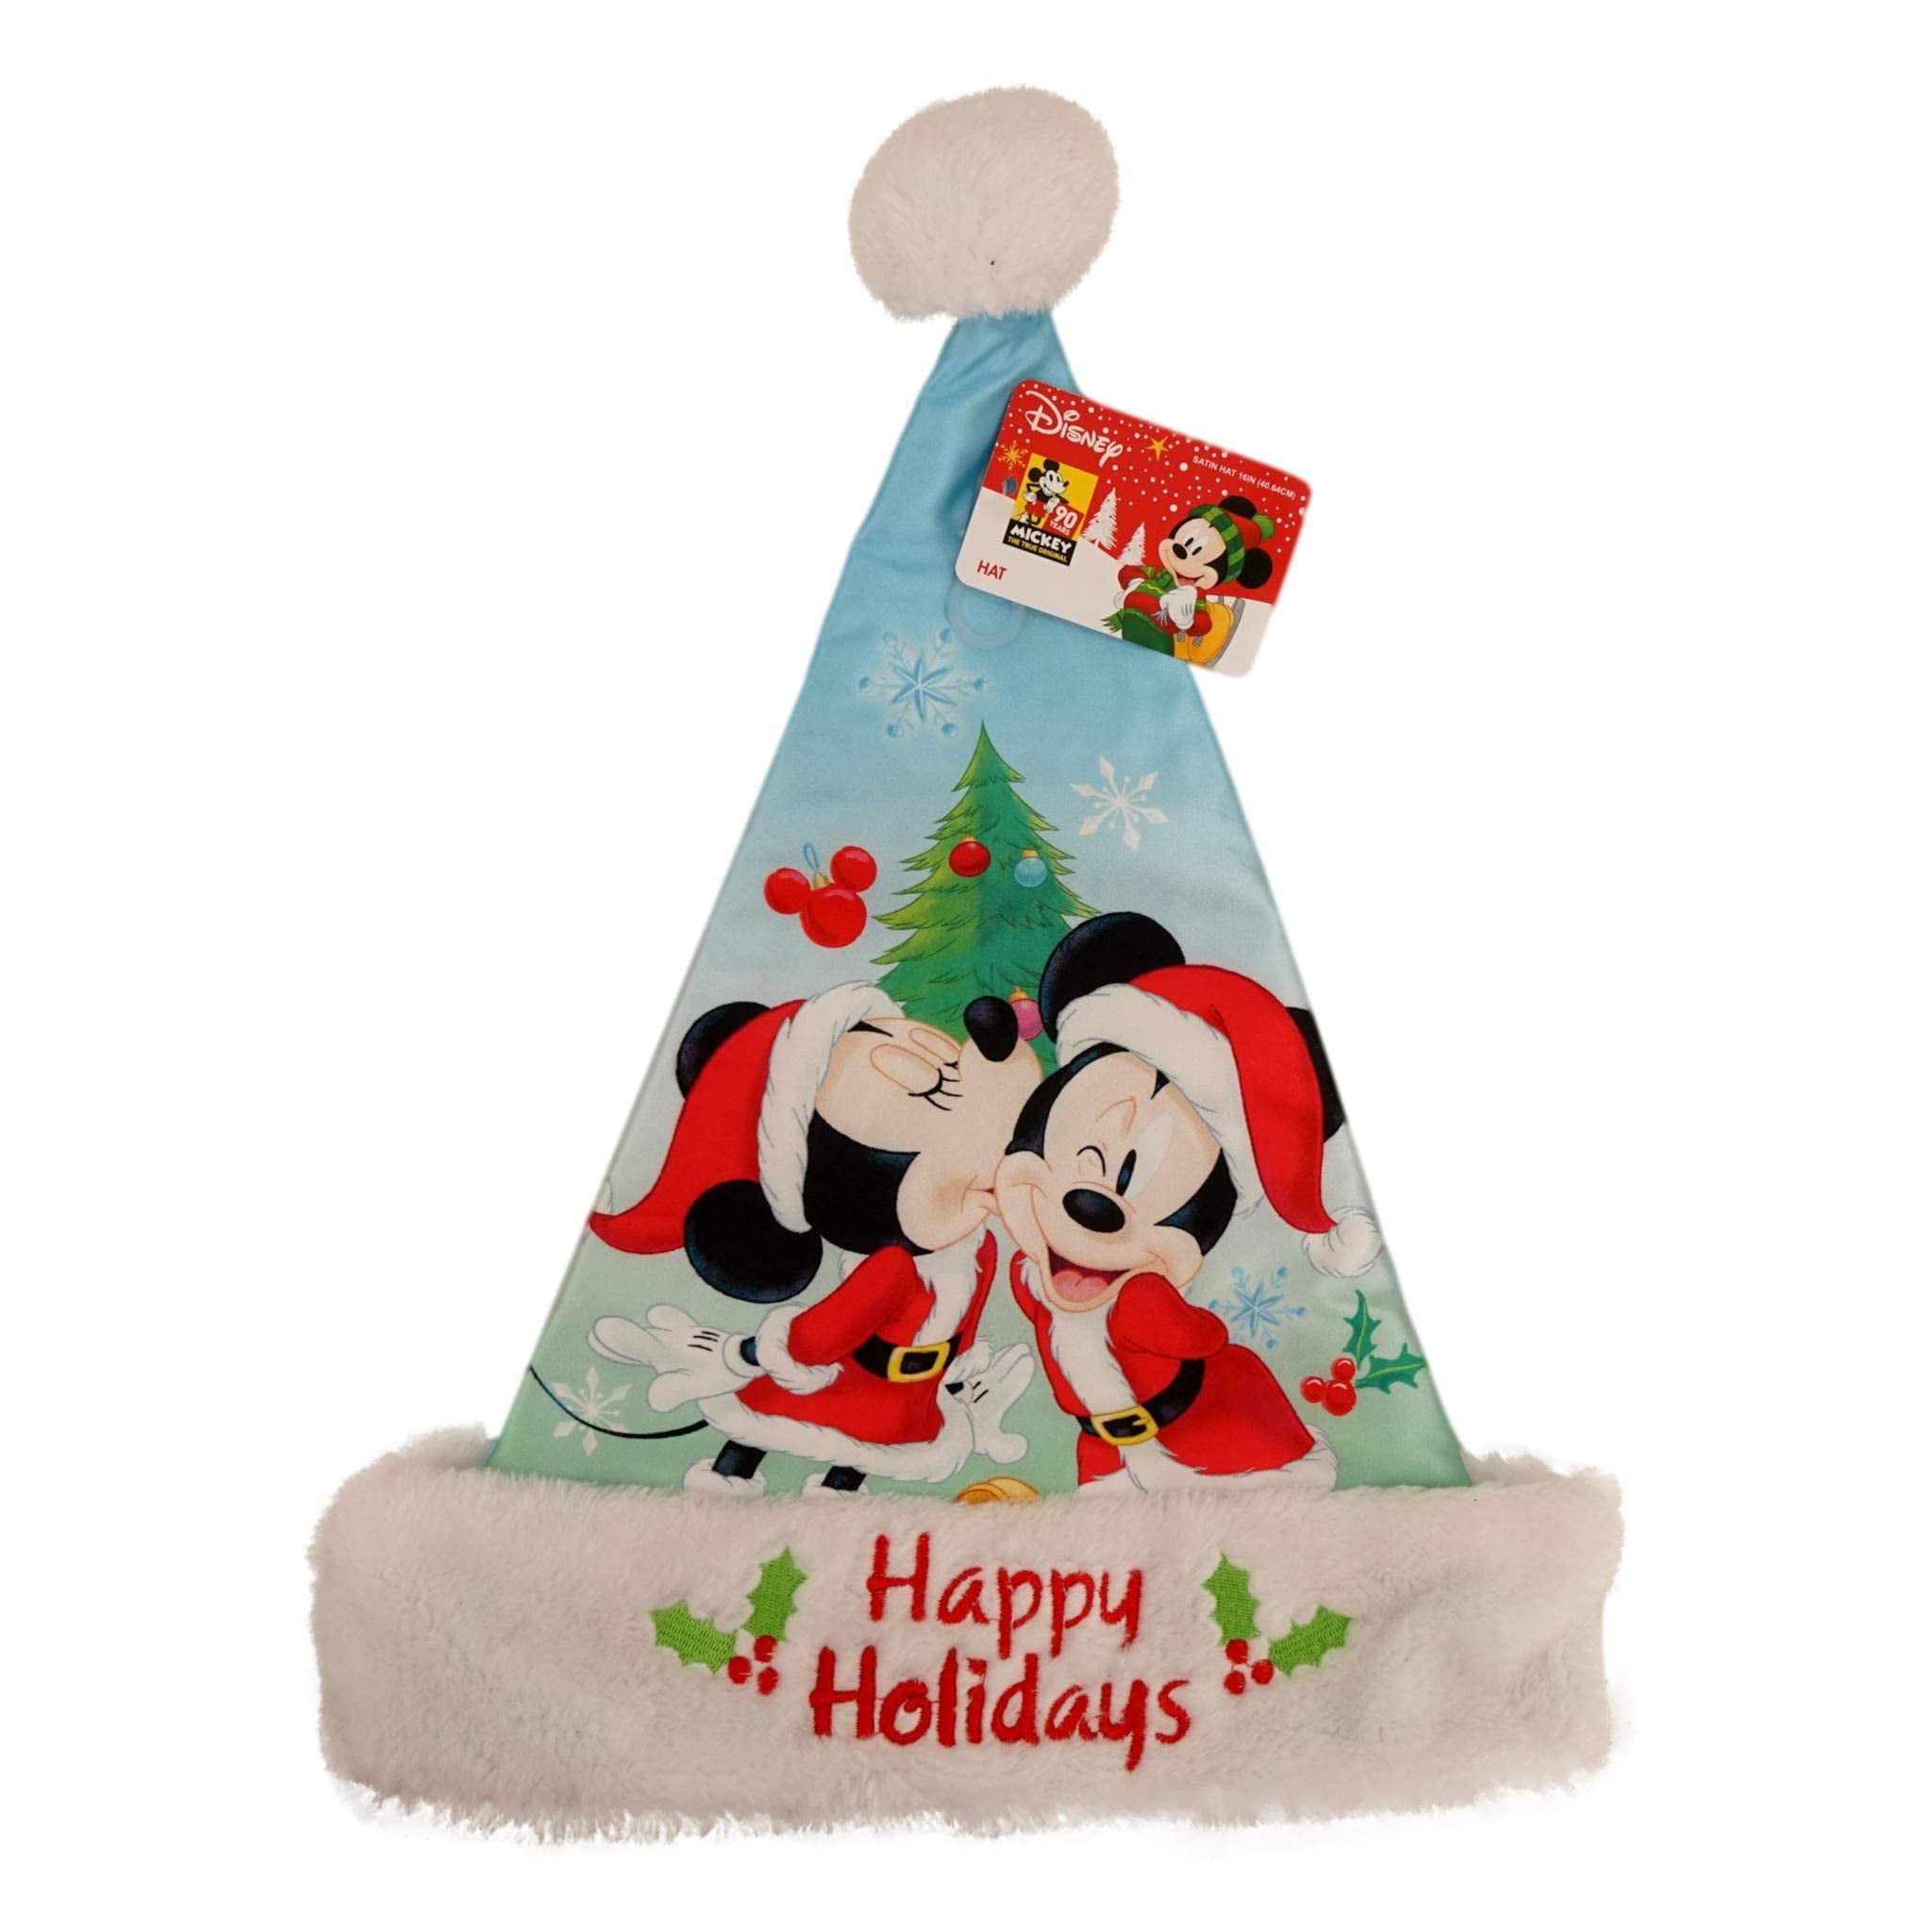 Minnie and Mickey Mouse Christmas Santa Hat (16 in tall, Blue) Satin feel,  Embroidered Merry Christmas Fluffy Rim, Pom Pom Xmas Party